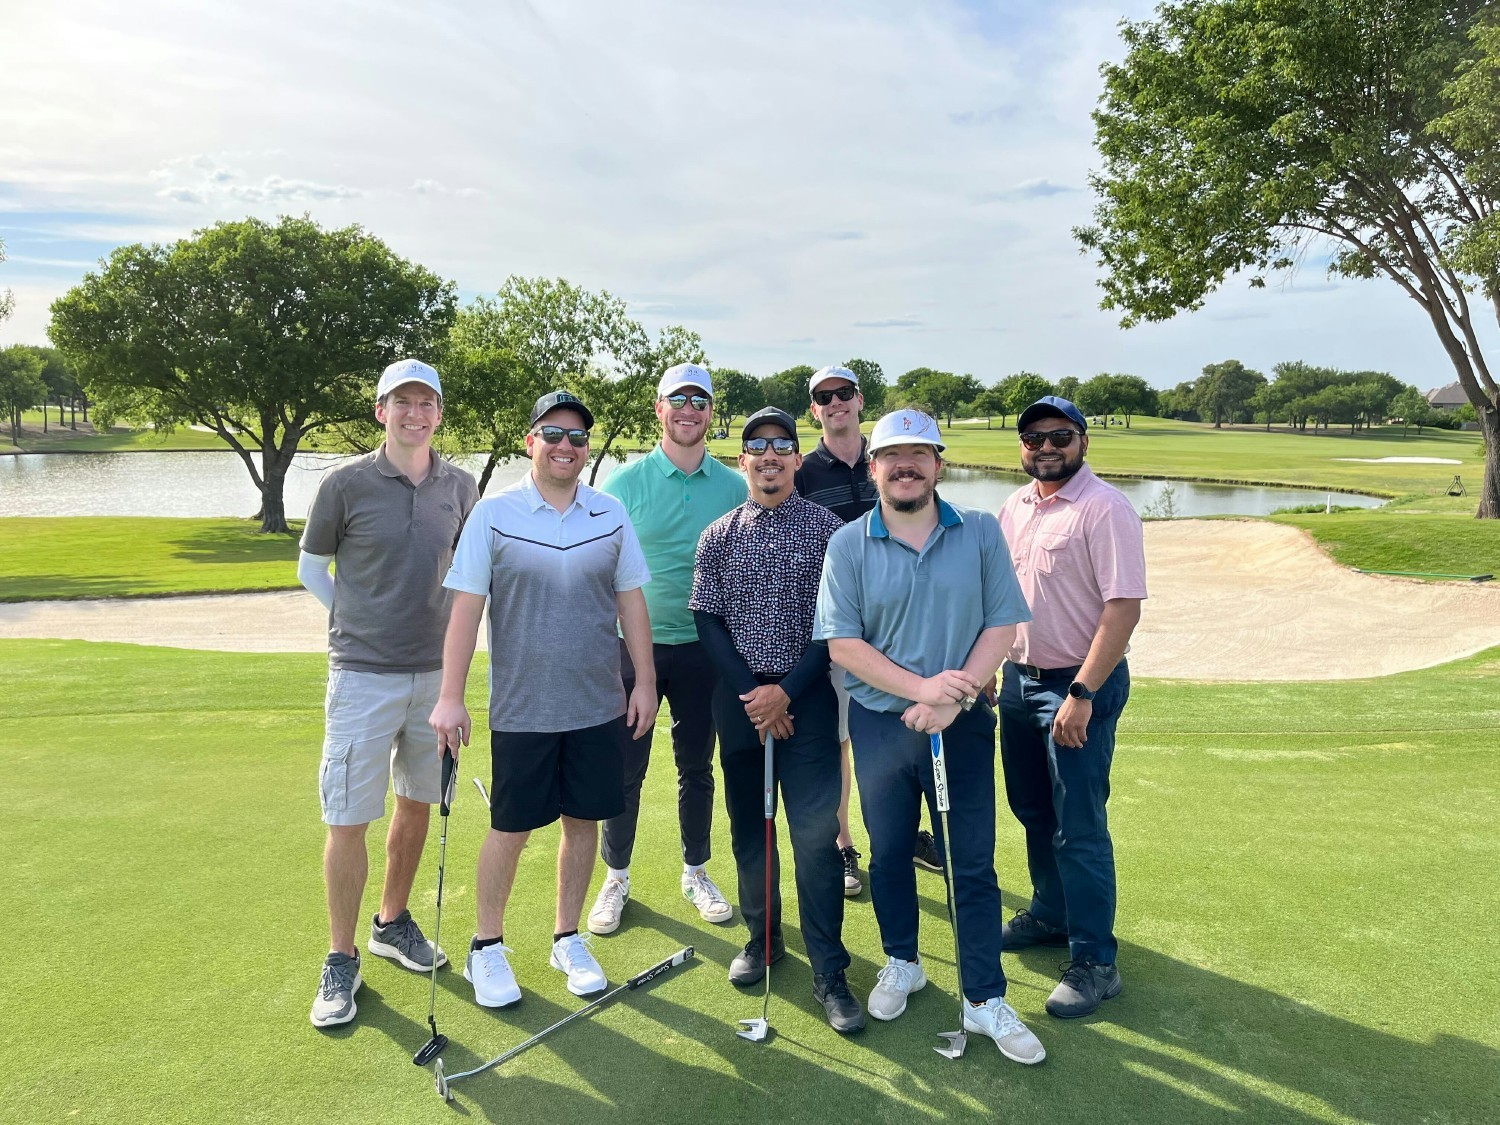 Celebrating 10 years with a golf outing